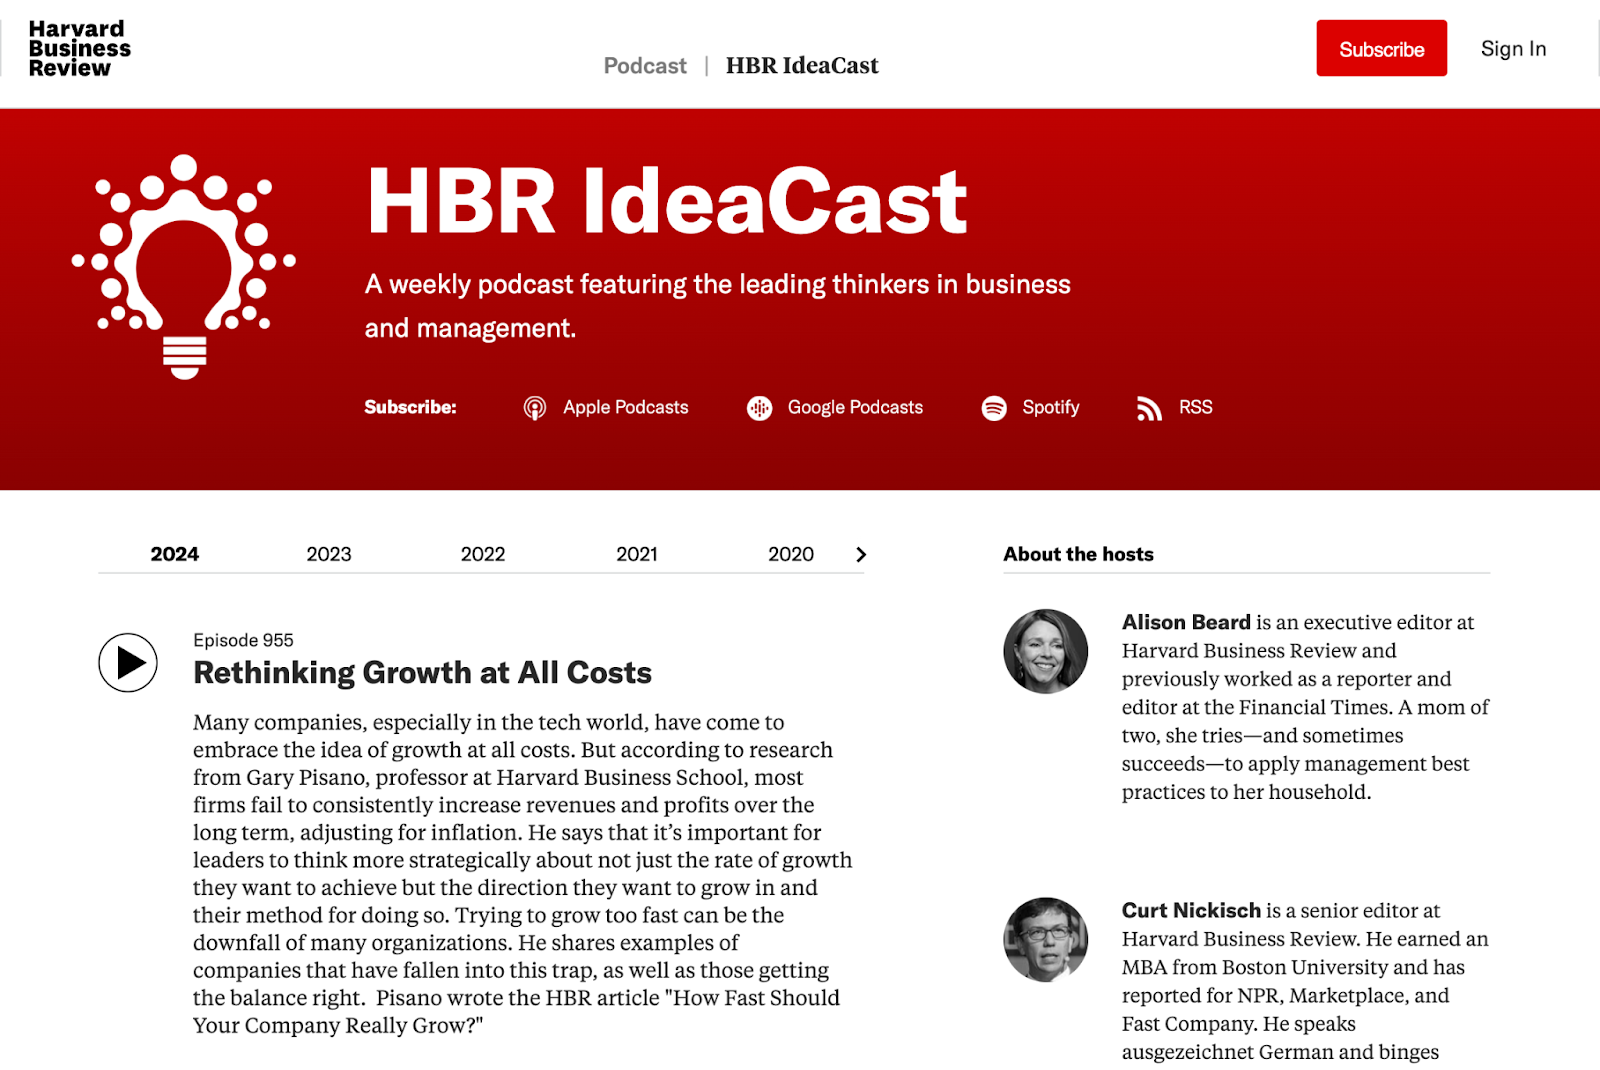 HBR podcast web page content marketing example 